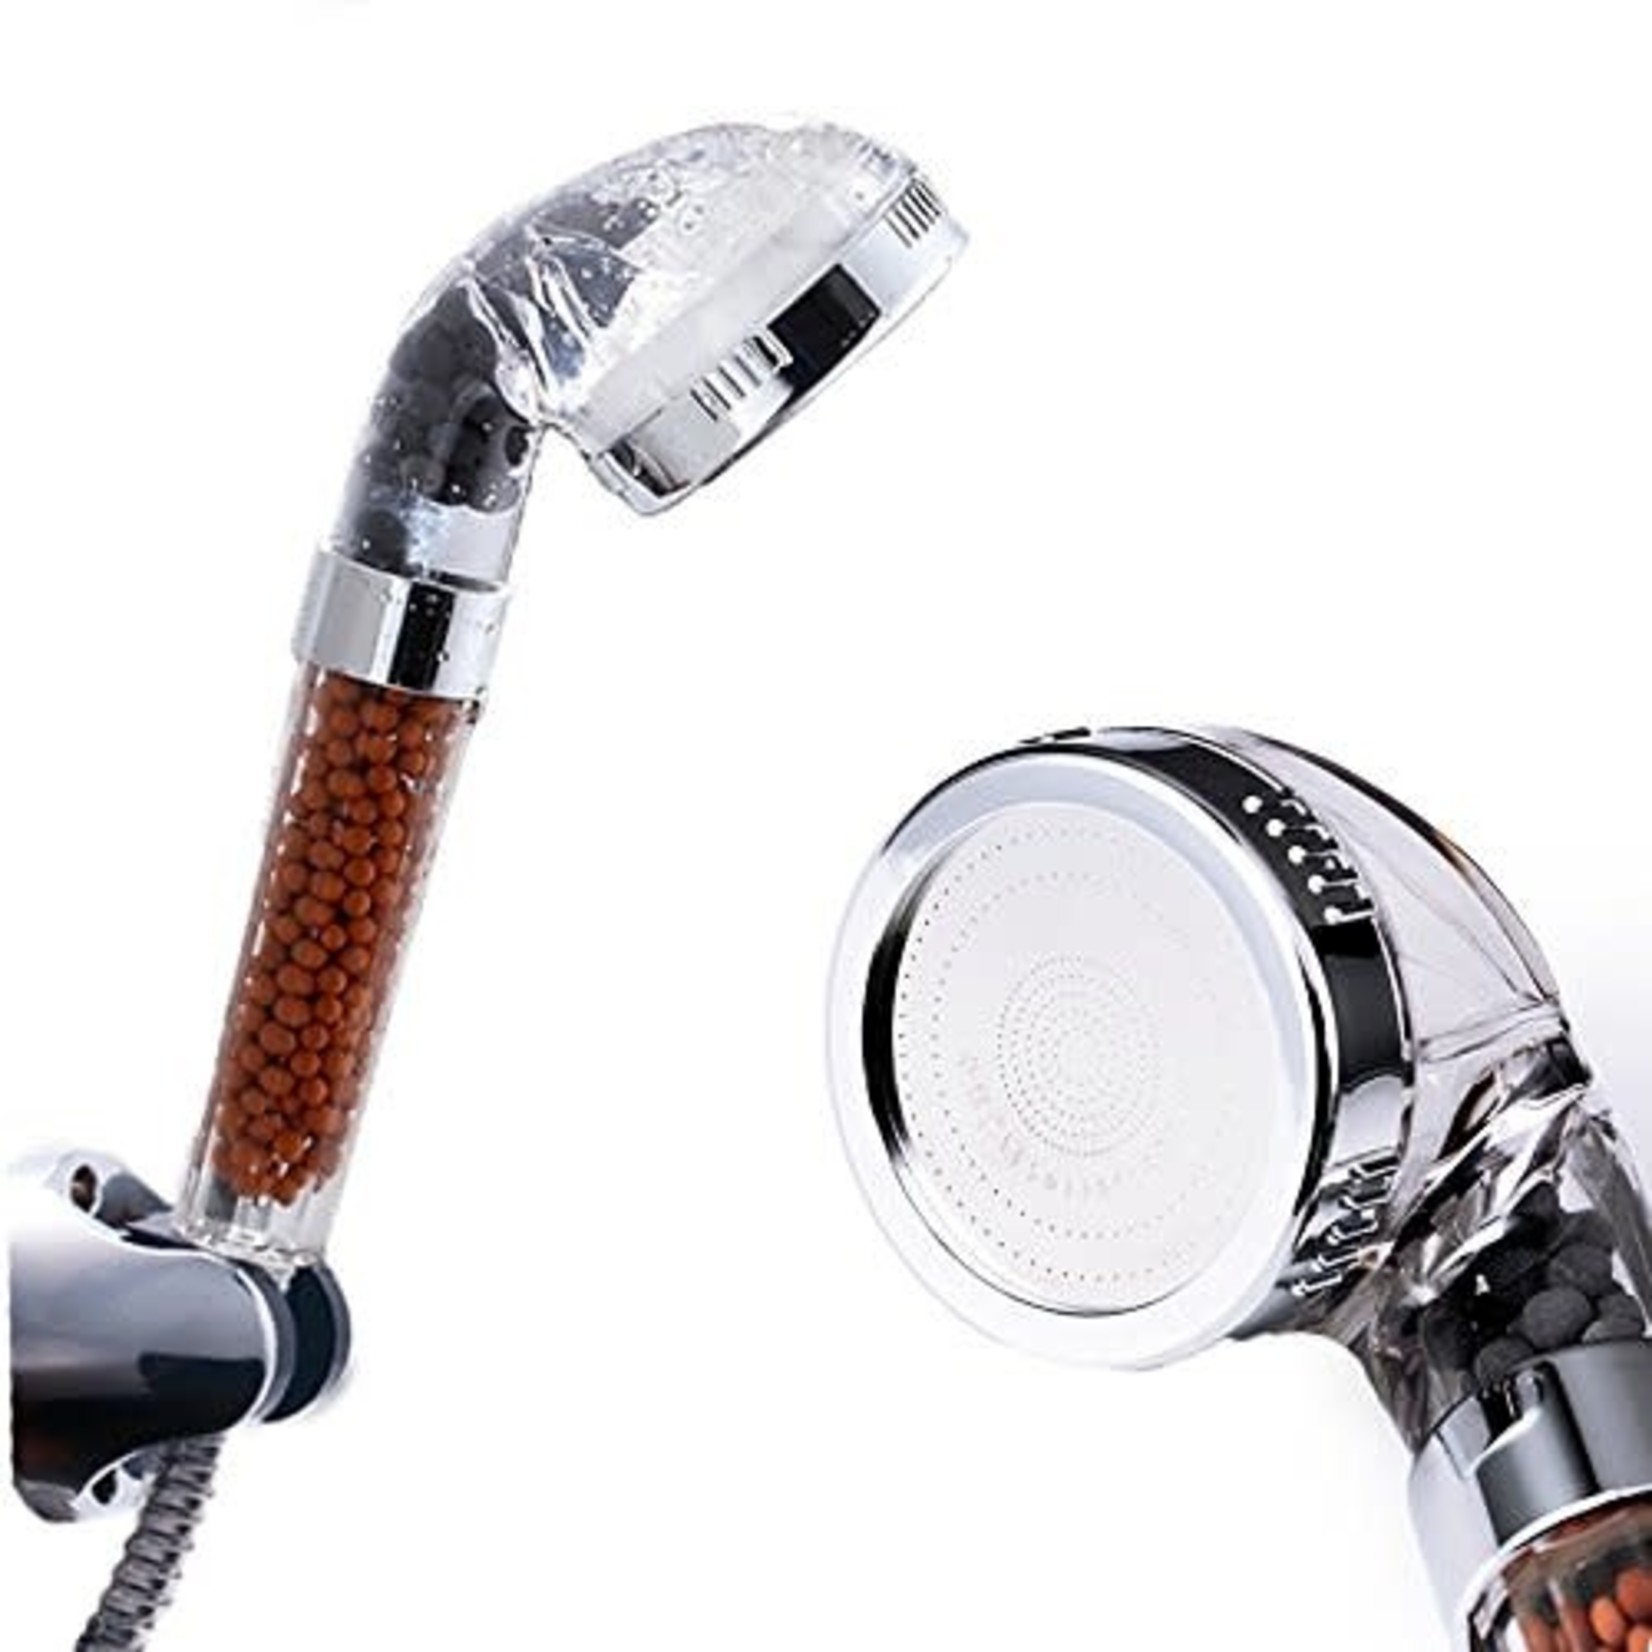 Ohpa Handheld Shower Head-Ionic Filter